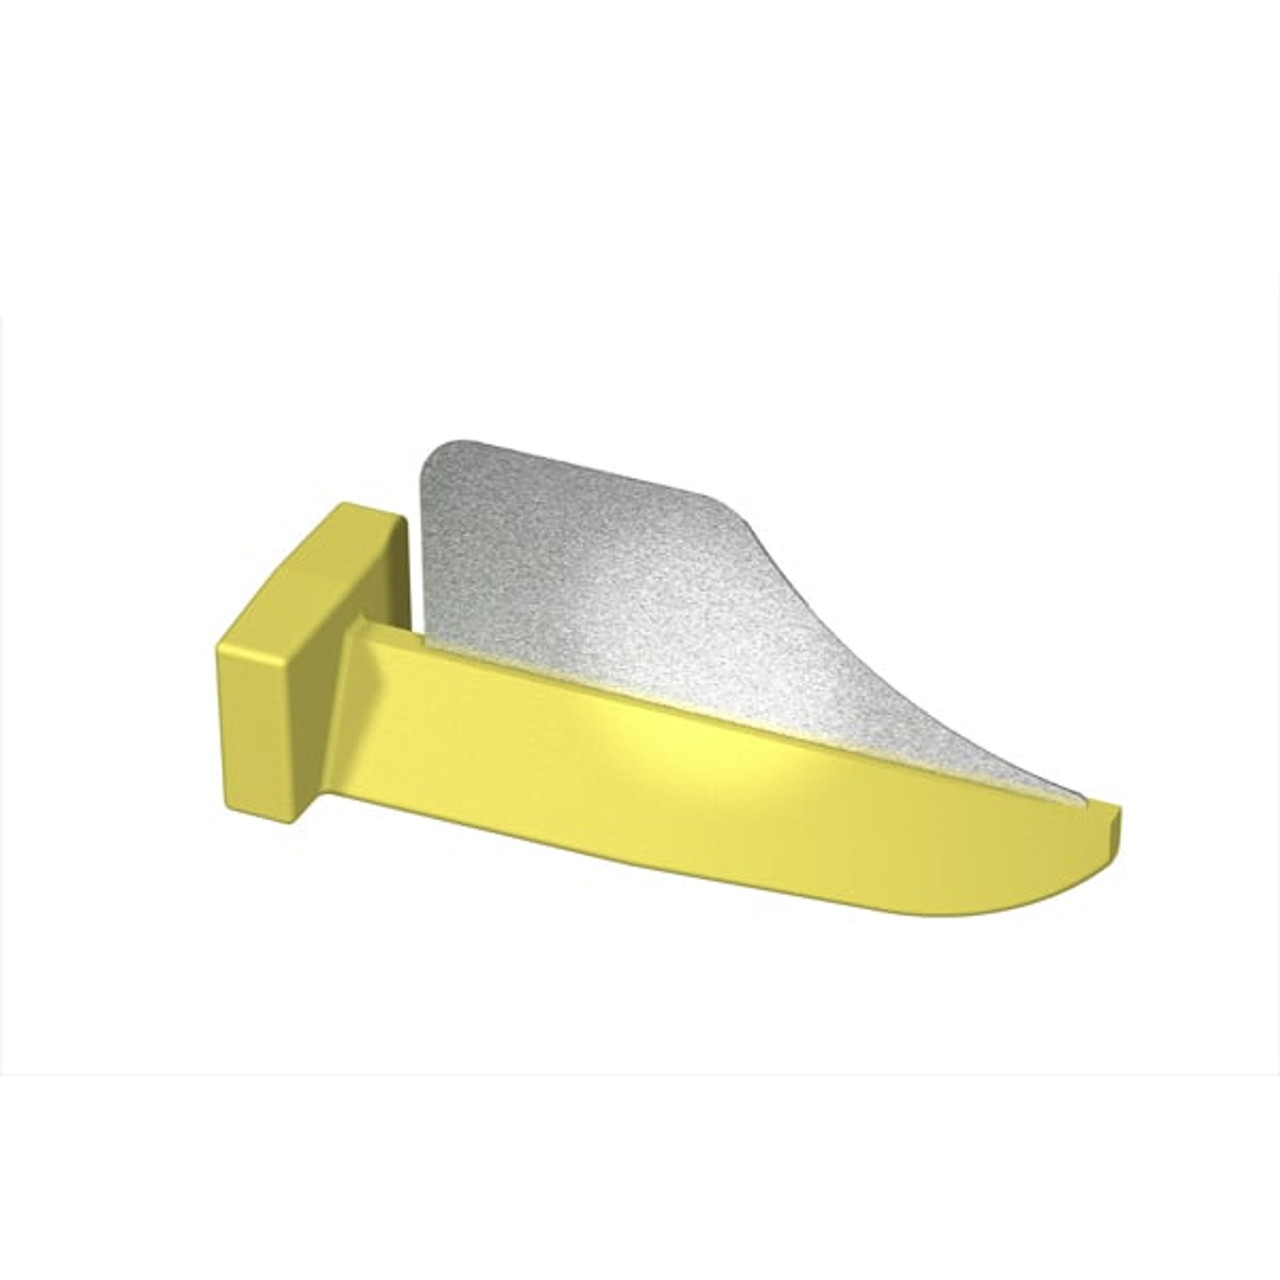 Directa FenderWedge Value Pack, Large 2.3mm, Yellow, 100/bx